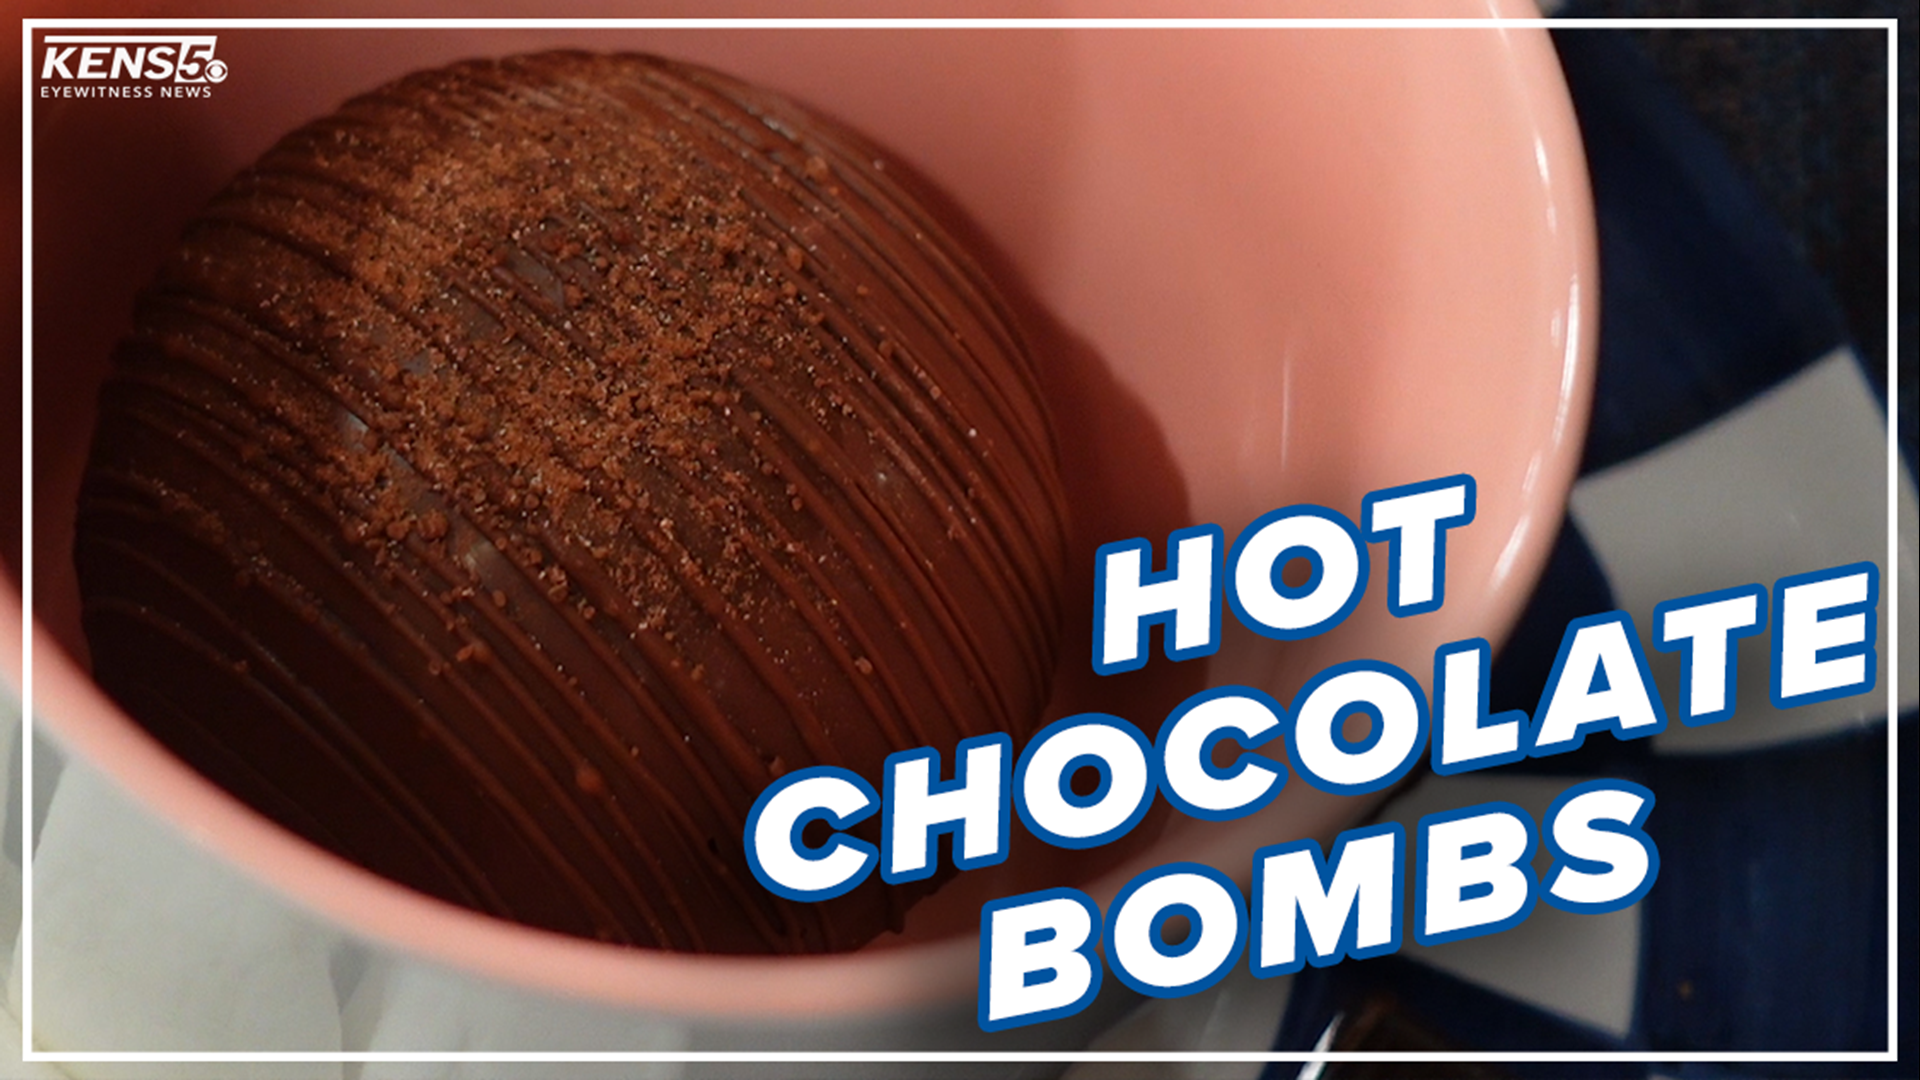 In an effort to support local businesses, especially in the pandemic, KENS 5 found two chocolate bomb makers who have made a career out of the sweet.